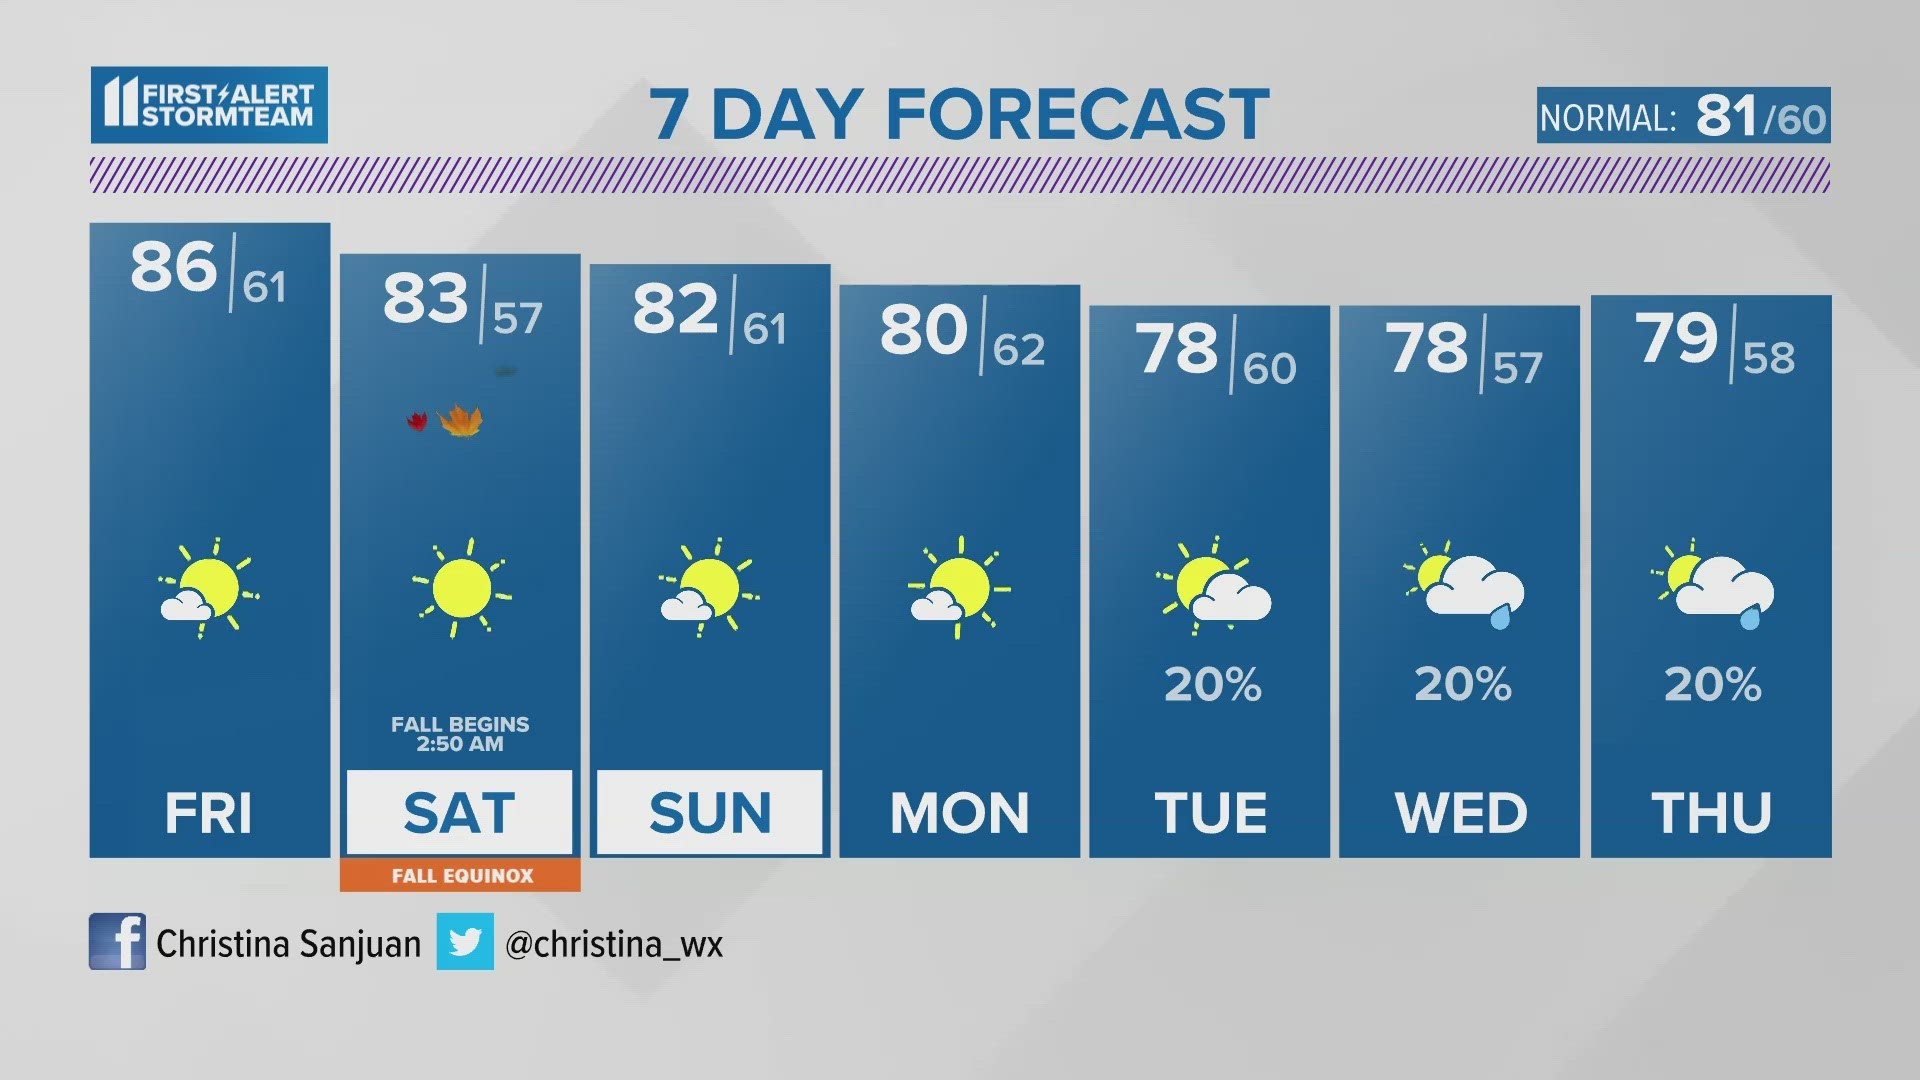 The first weekend of fall is looking fantastic! Rain chances still look minimal.